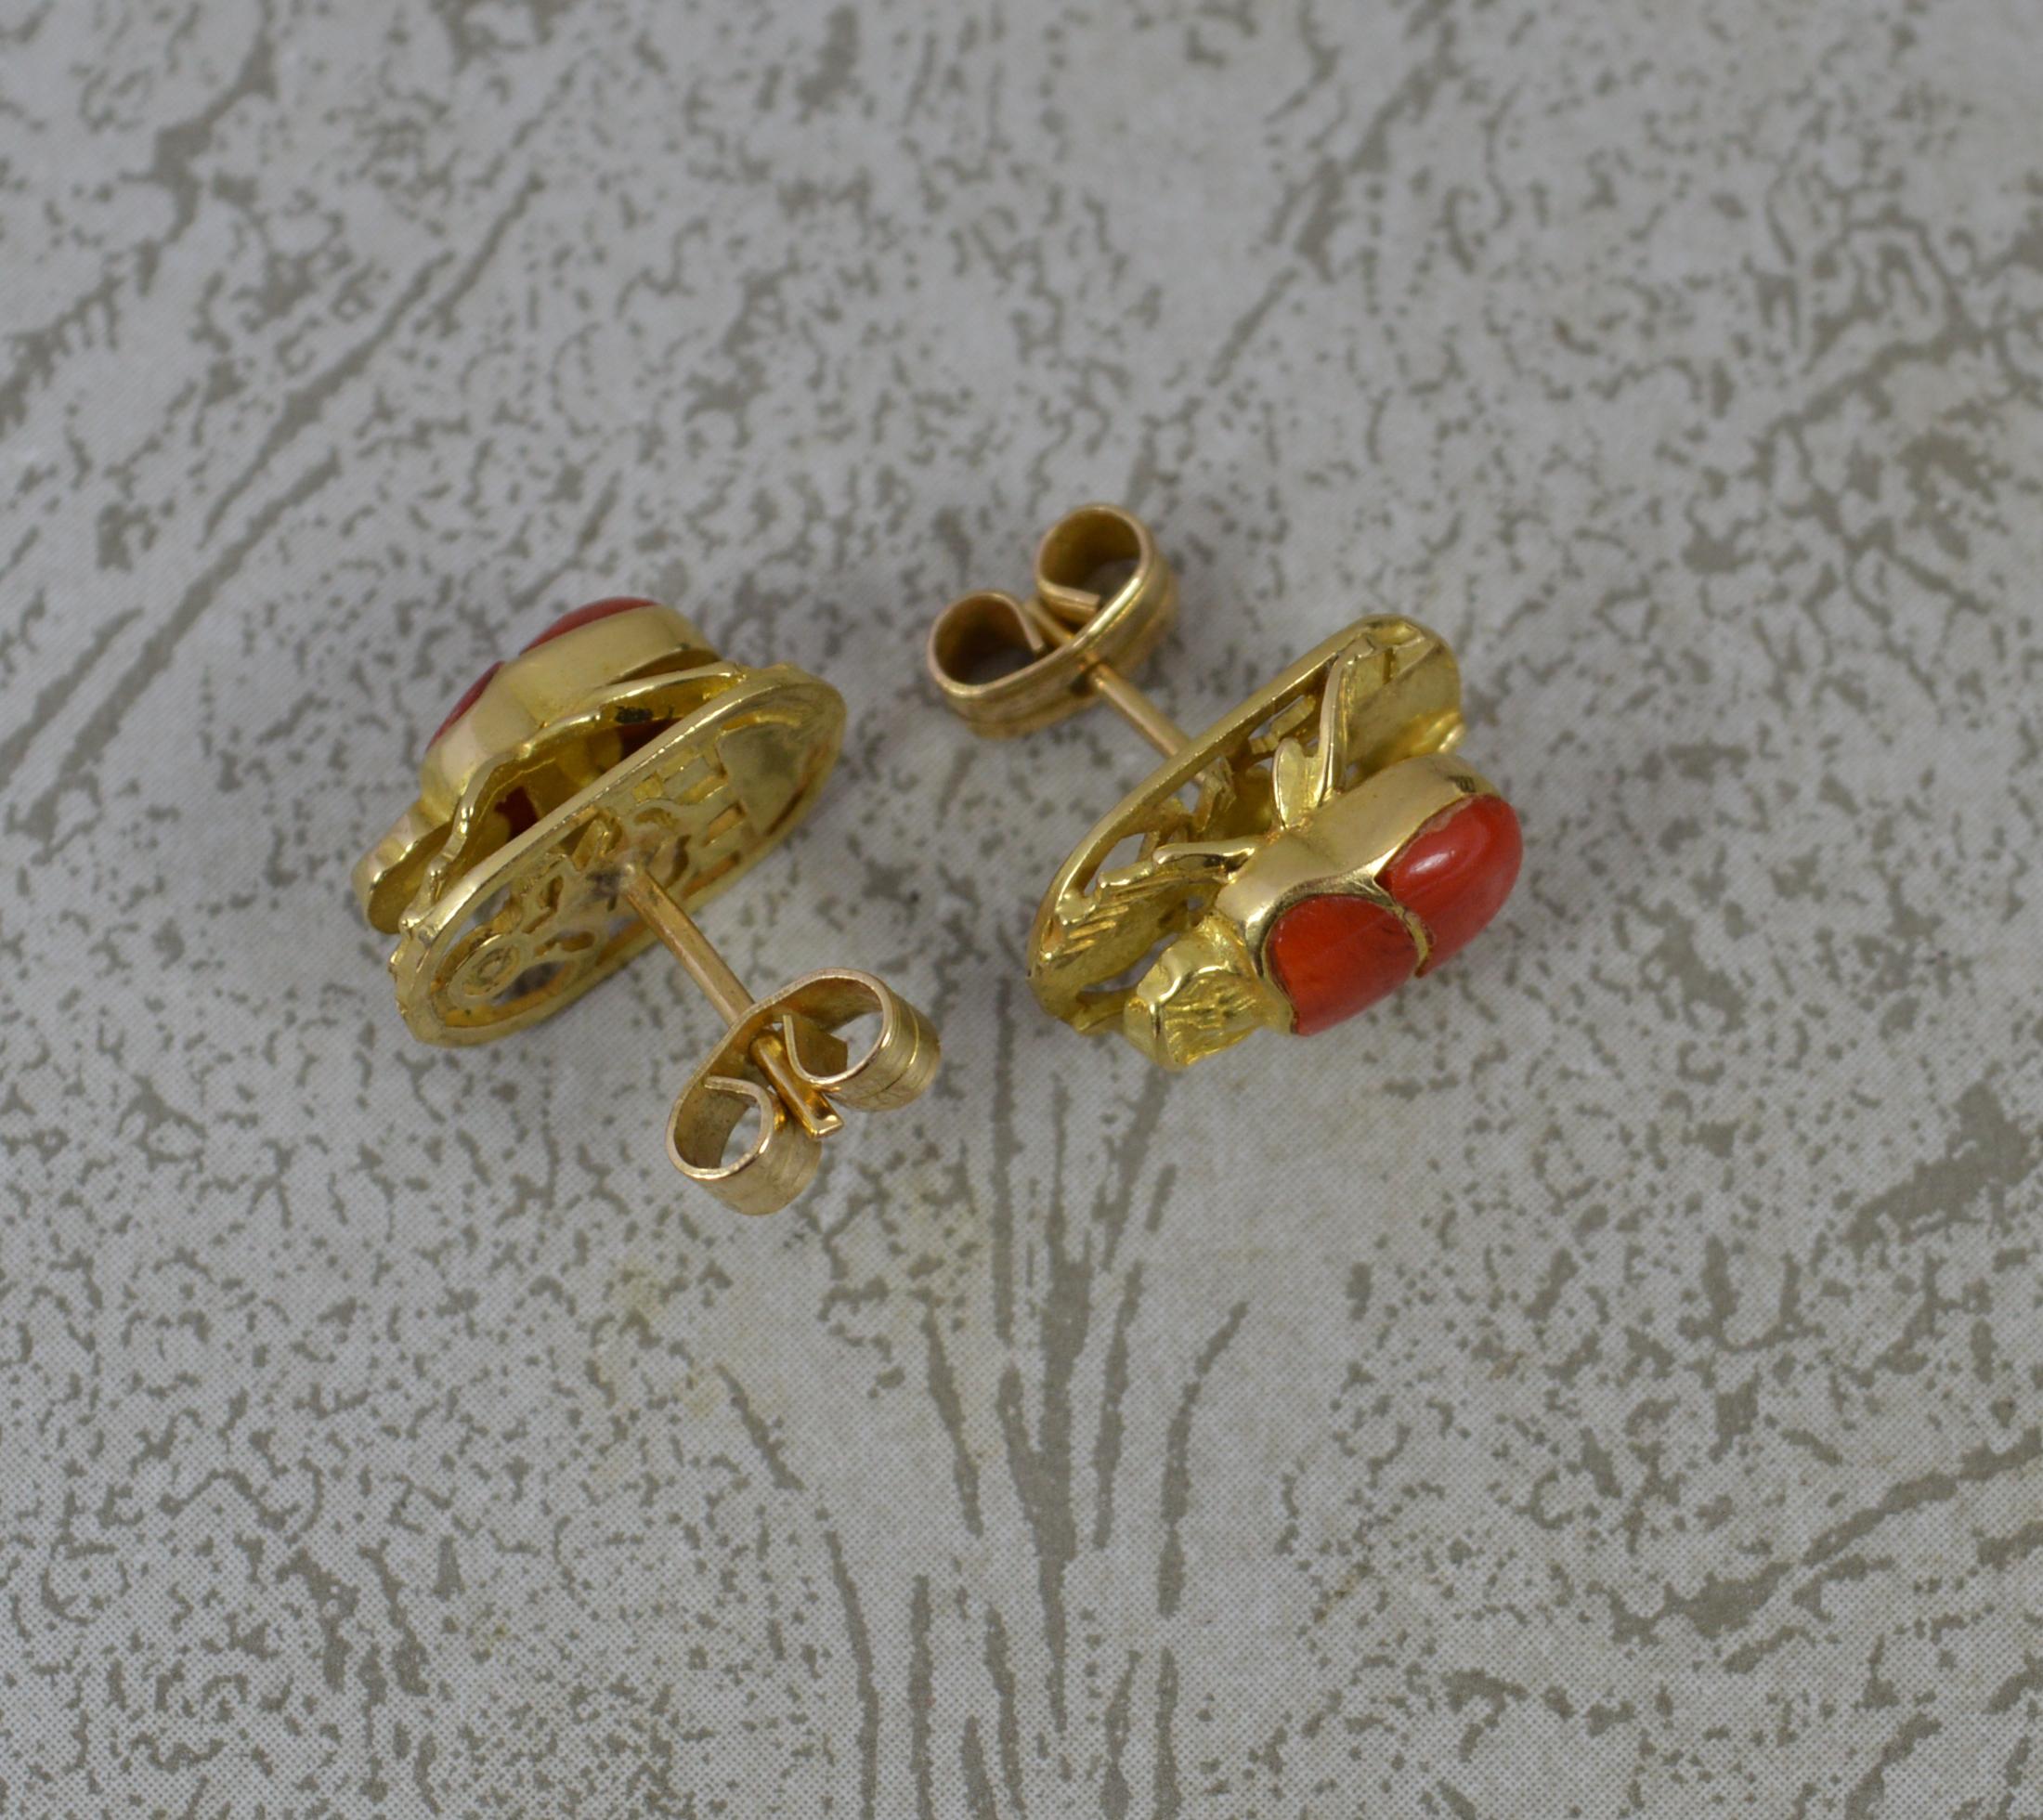 A superb pair of 18ct gold earrings.
Designed as a scarab beetle, realistically made.
Set with two pieces of coral to each.
8.5mm x 13.5mm studs.

CONDITION ; Very good. Crisp design. Issue free. Well fitted backs. Please view photographs.
WEIGHT ;